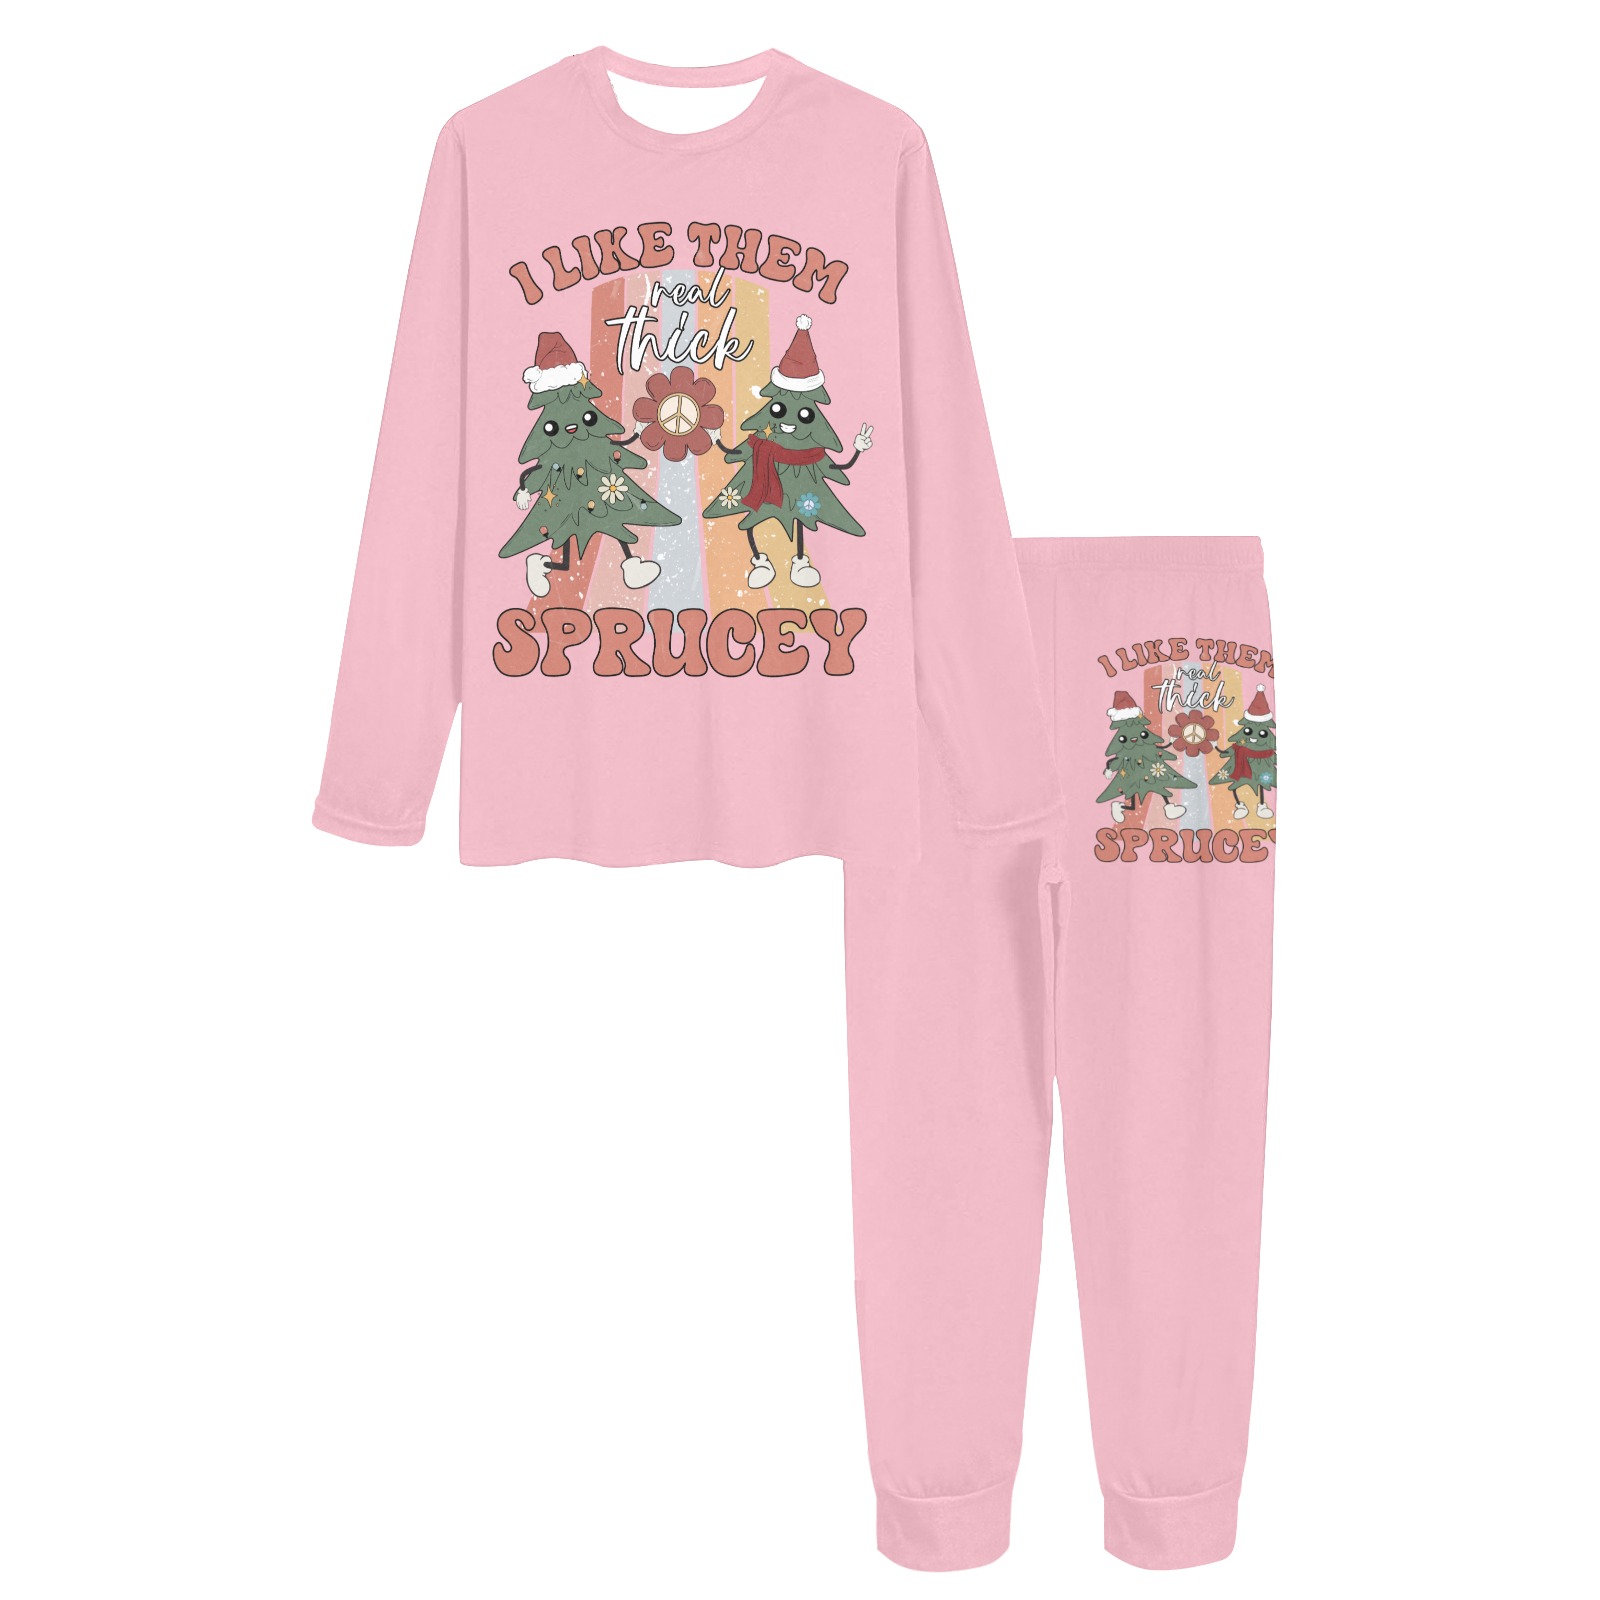 I Like The Real Thick And Sprucey (P) Women's All Over Print Pajama Set